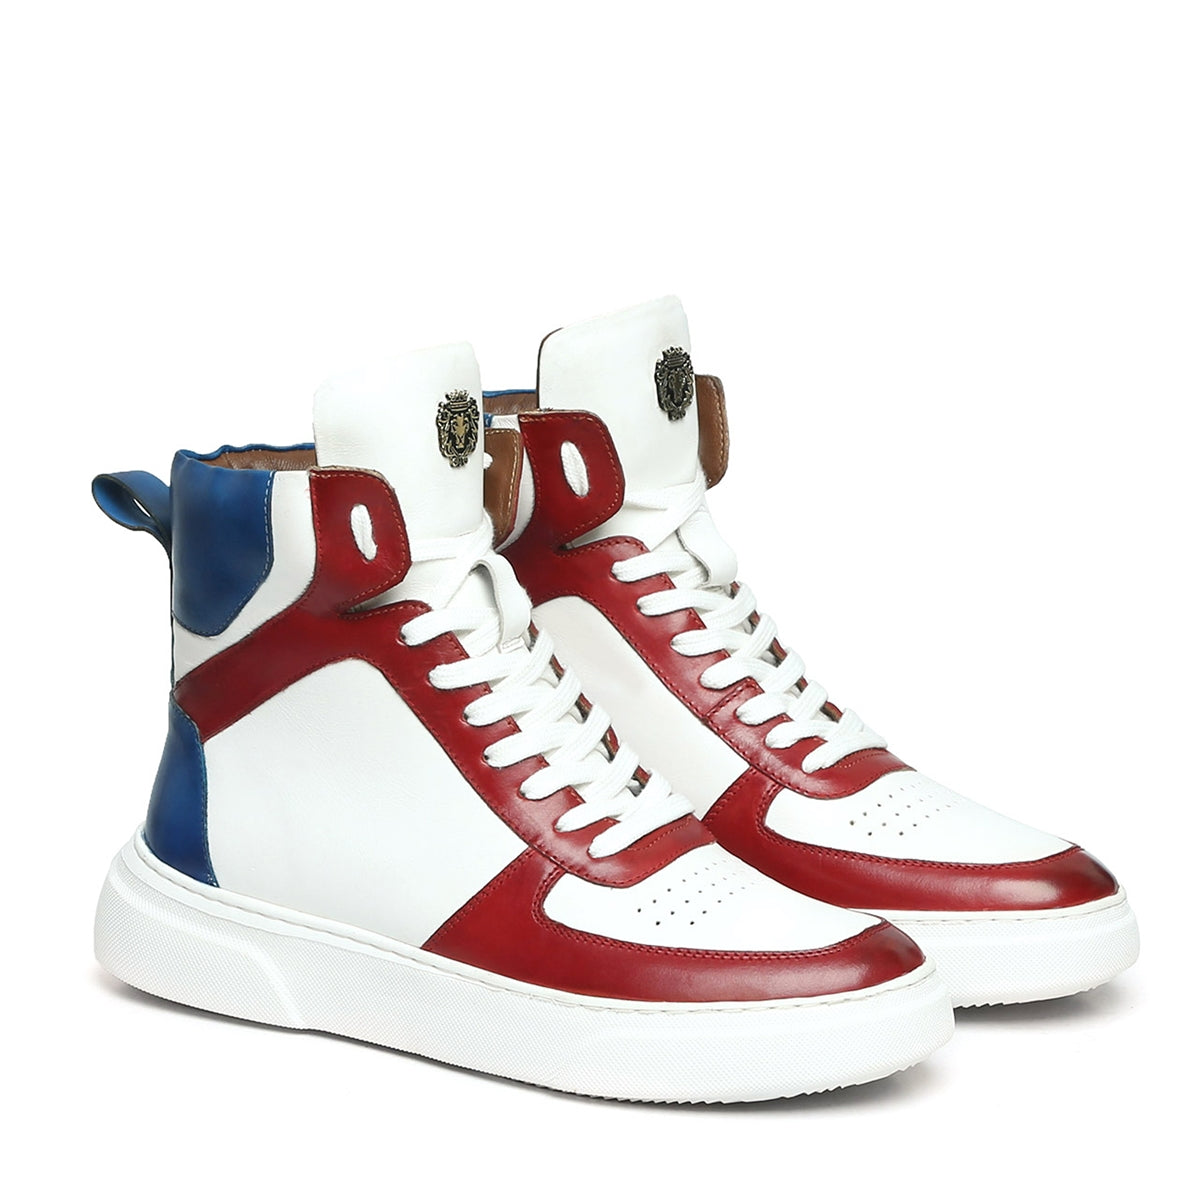 White High with Contrasting Blue Leather Detailin